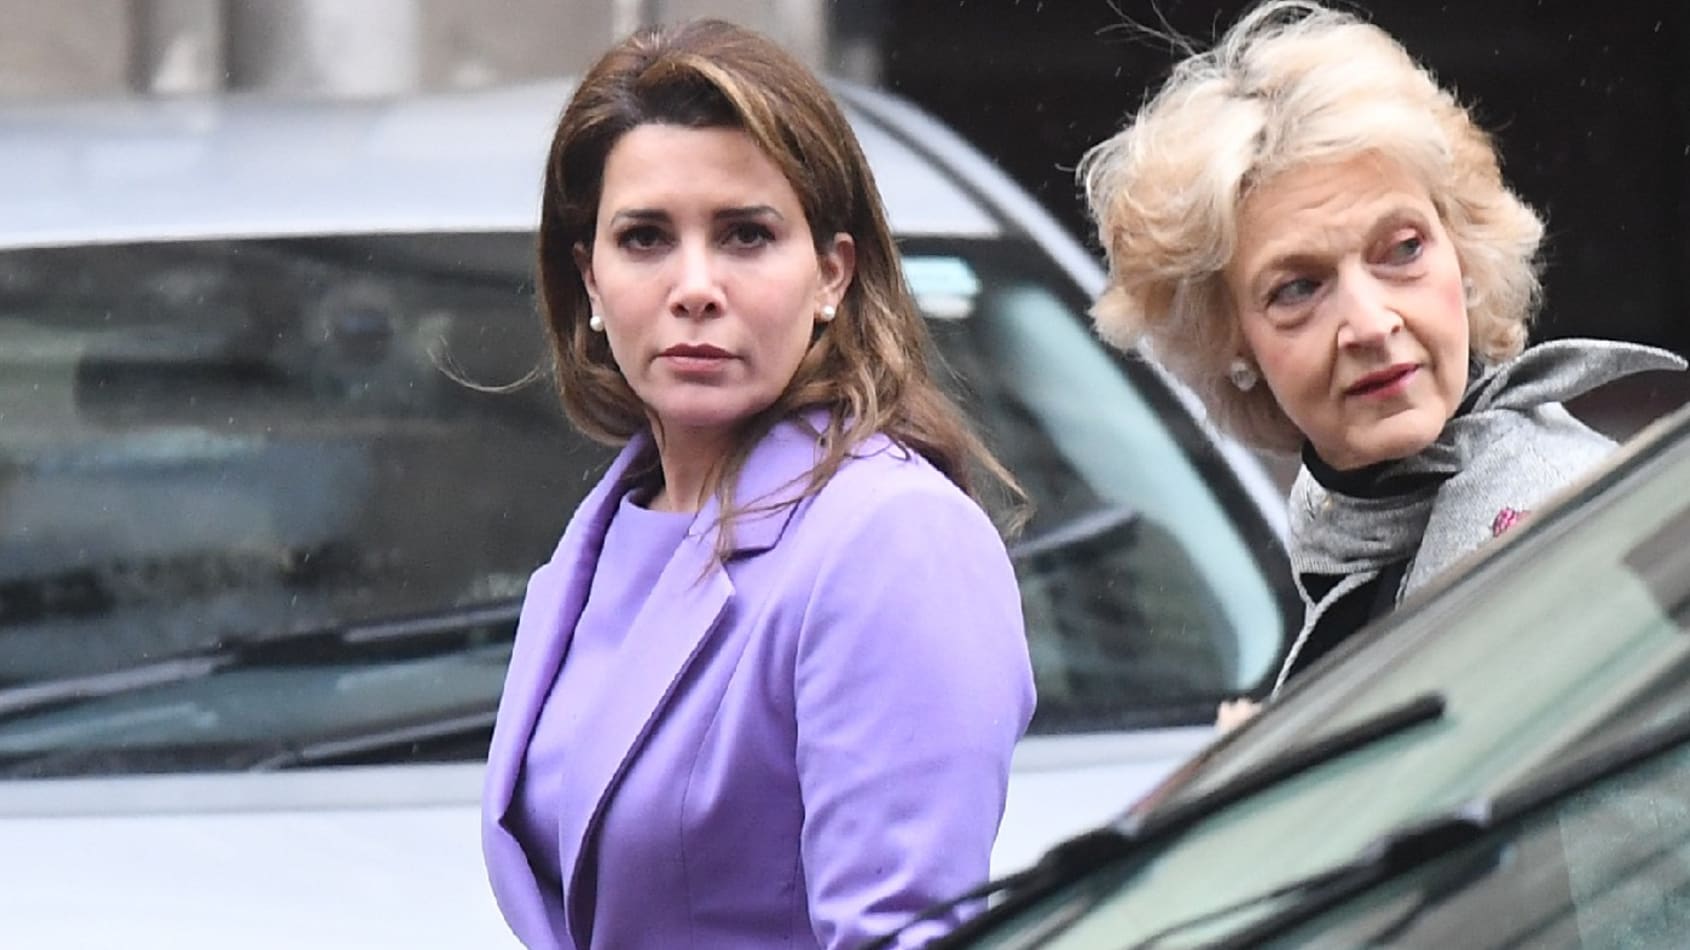 The legal battle between Princess Haya and Sheikh Mohammed